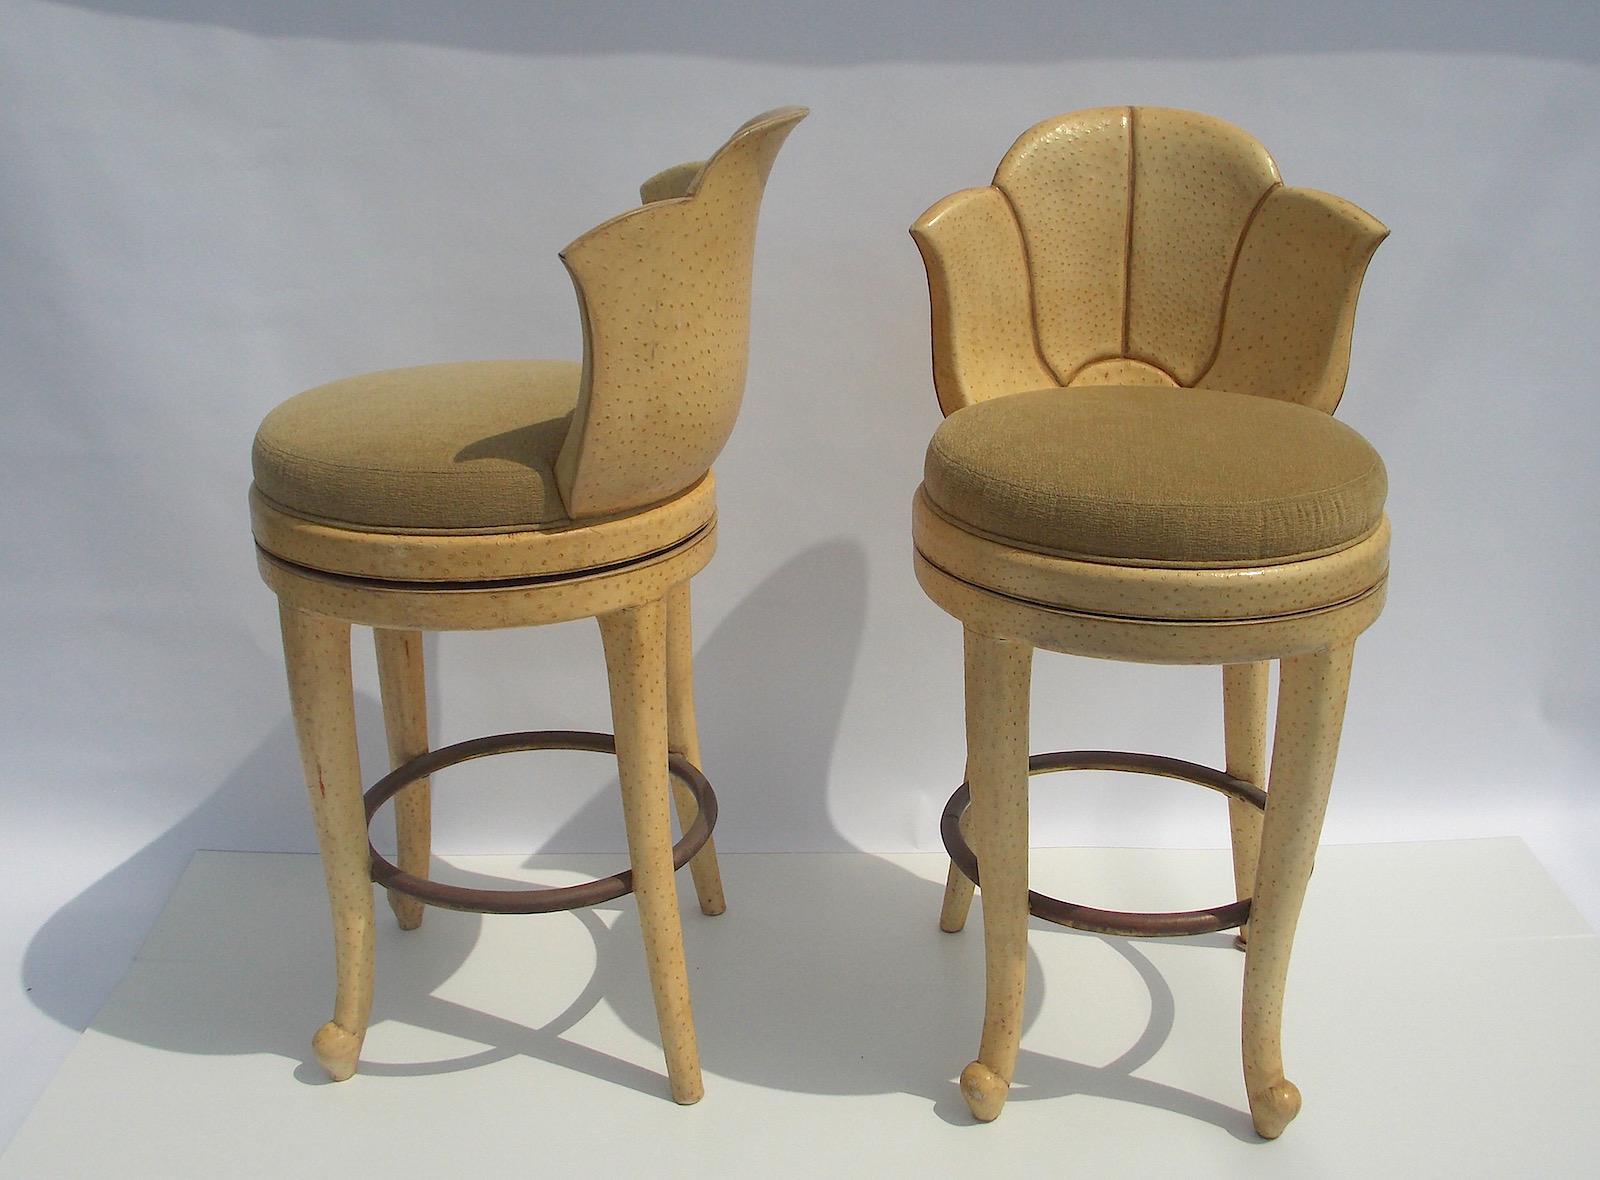 A pair of bar stools in ostrich leather
Original upholstered seats and surface.
Price is for the pair.